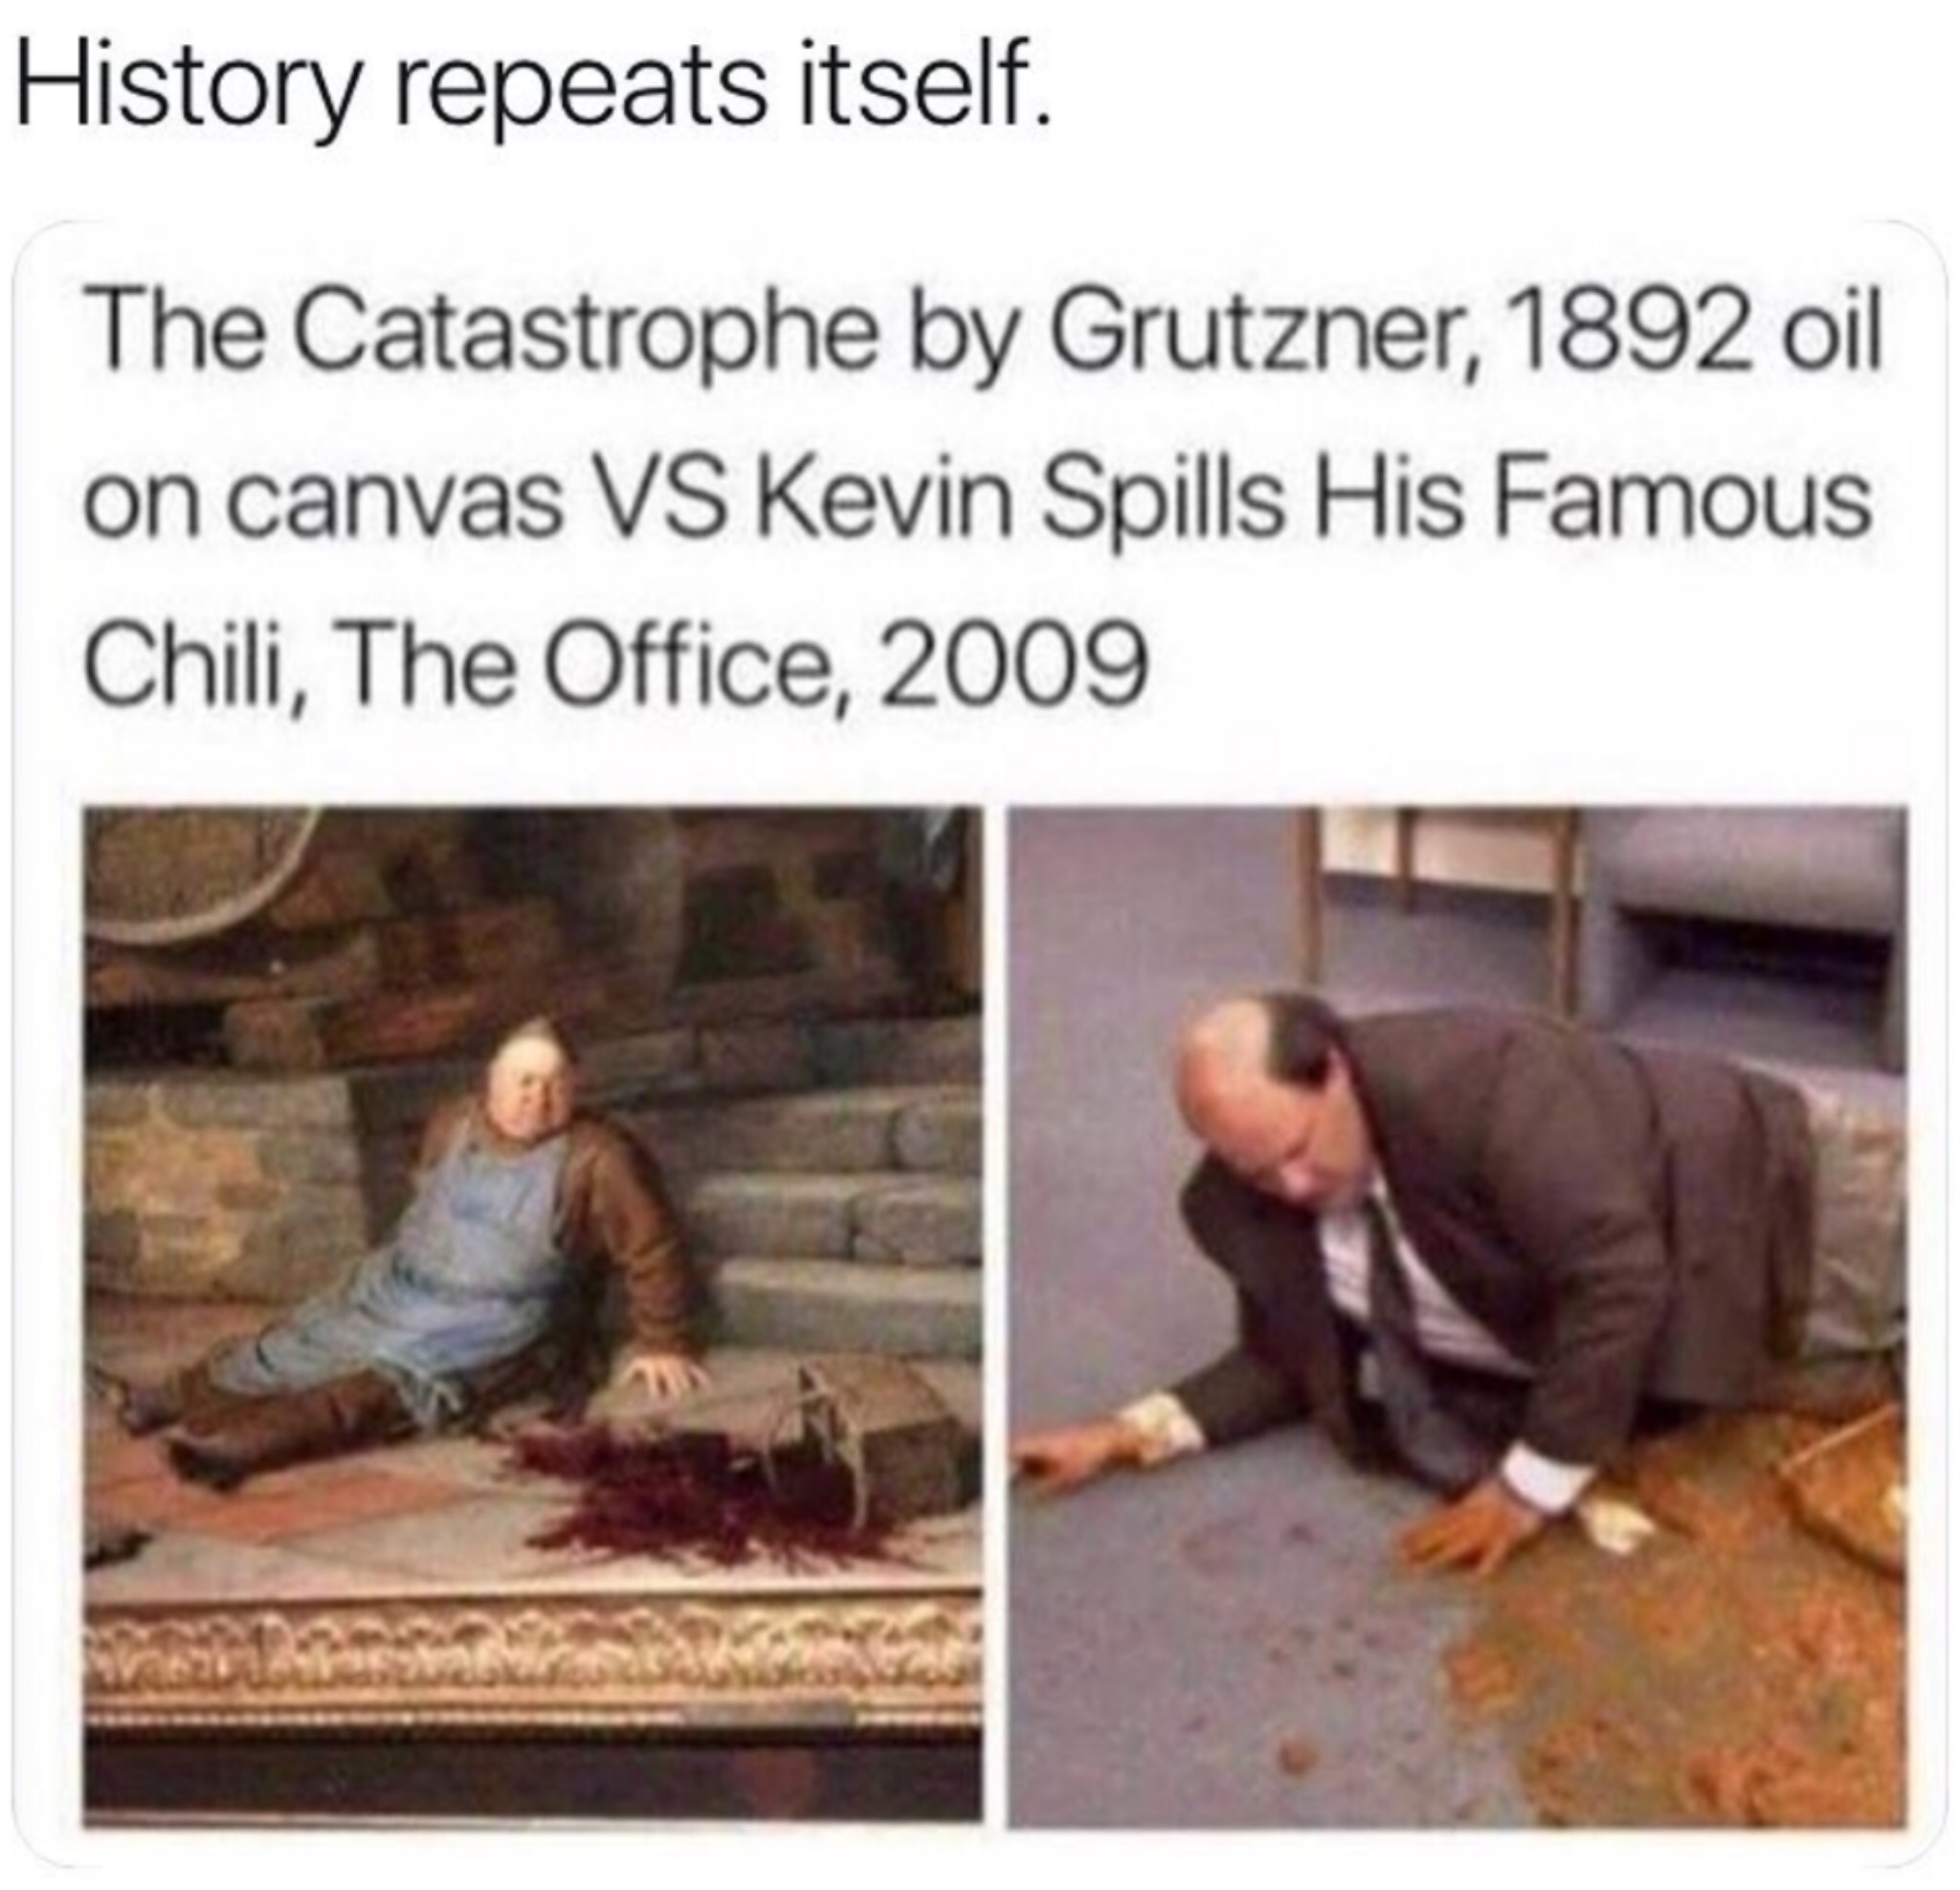 catastrophe by grutzner - History repeats itself. The Catastrophe by Grutzner, 1892 oil on canvas Vs Kevin Spills His Famous Chili, The Office, 2009